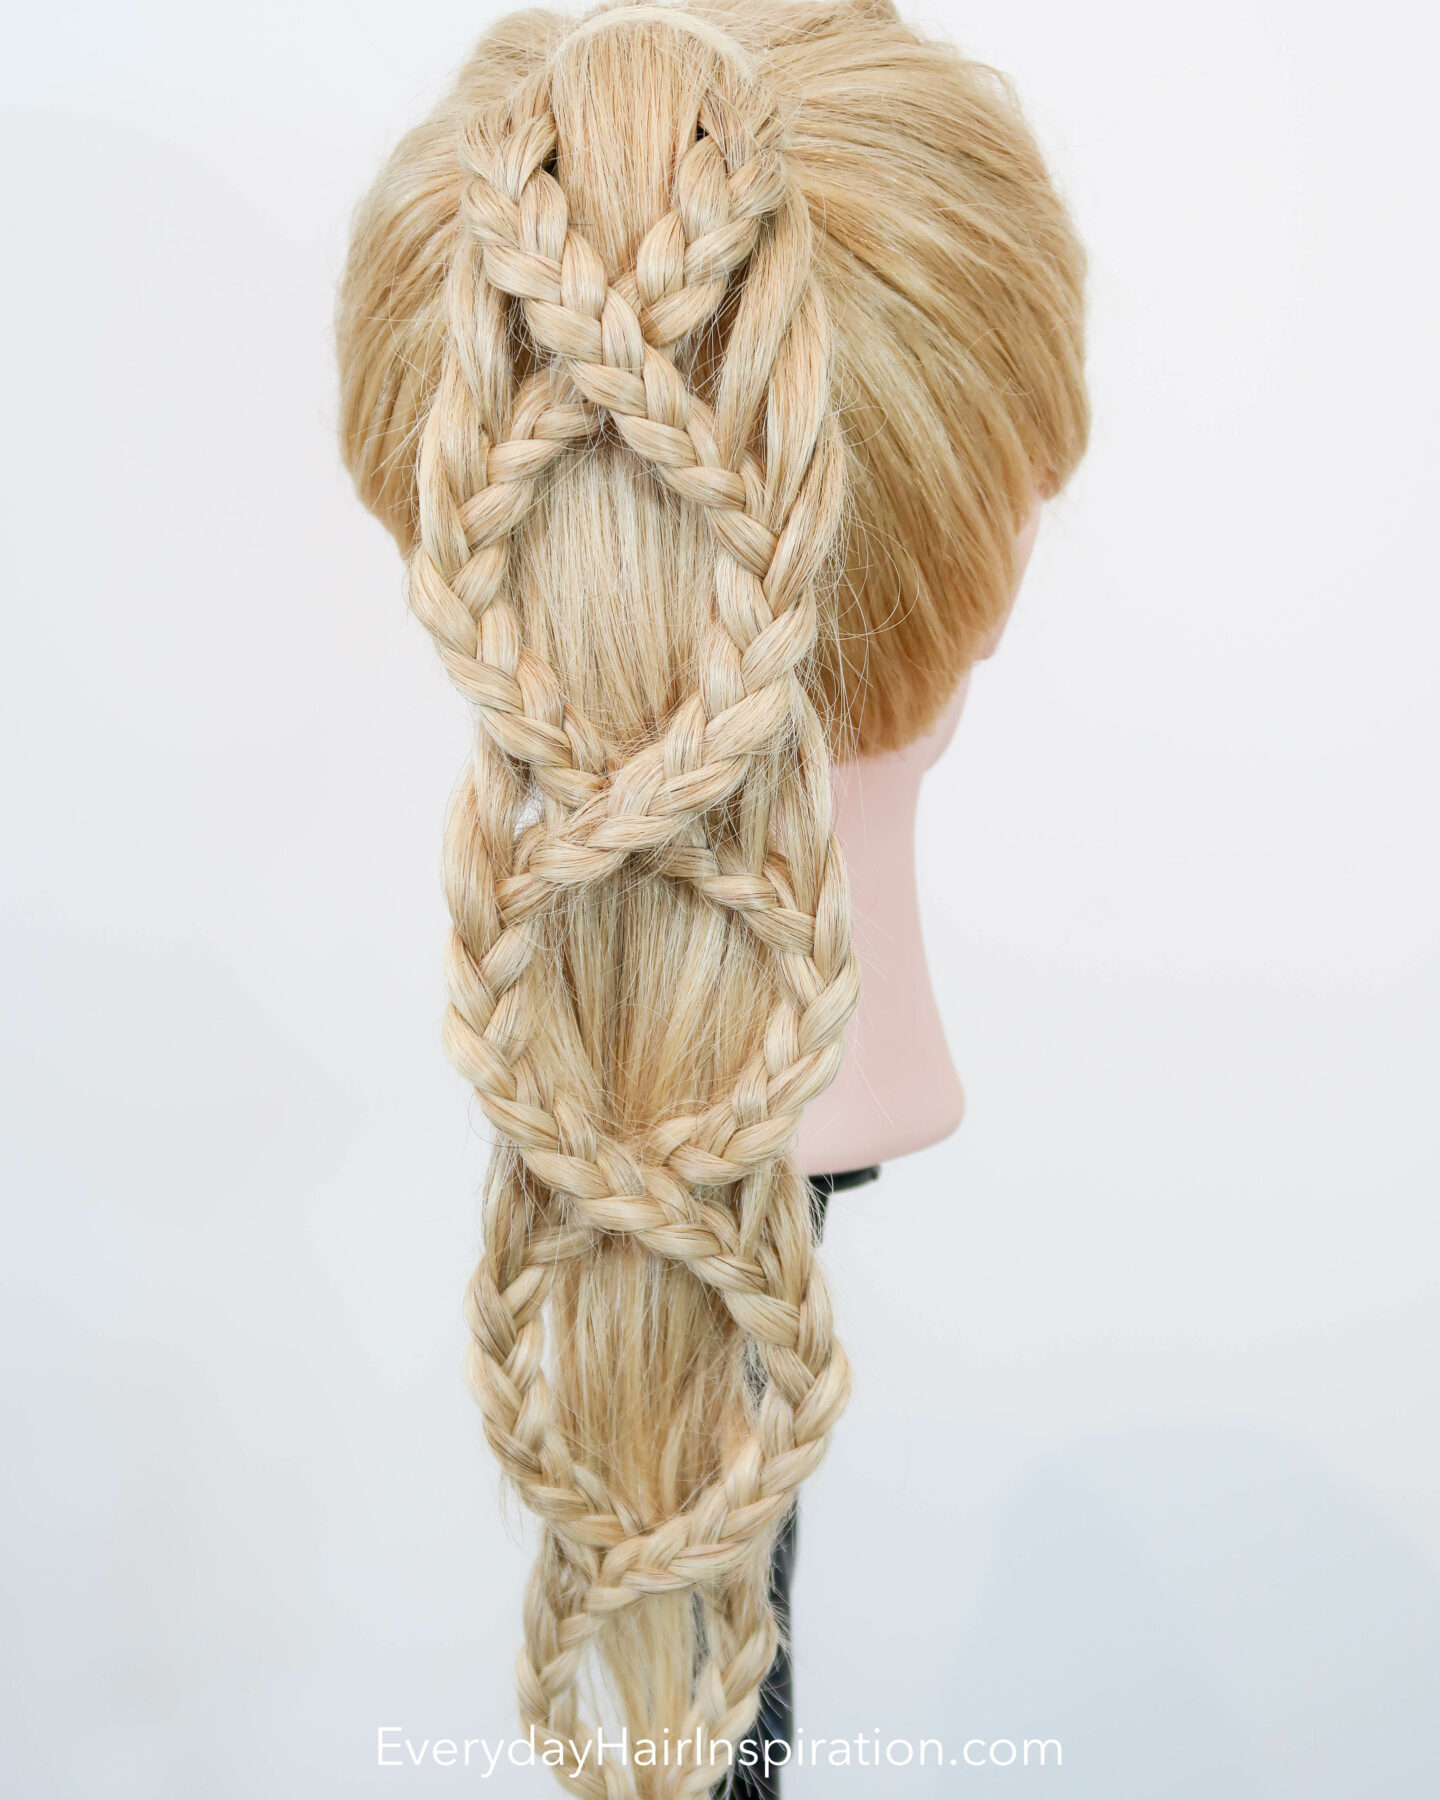 Blonde hair dresser doll seen dorm the back at an angle with a criss-cross braided ponytail.